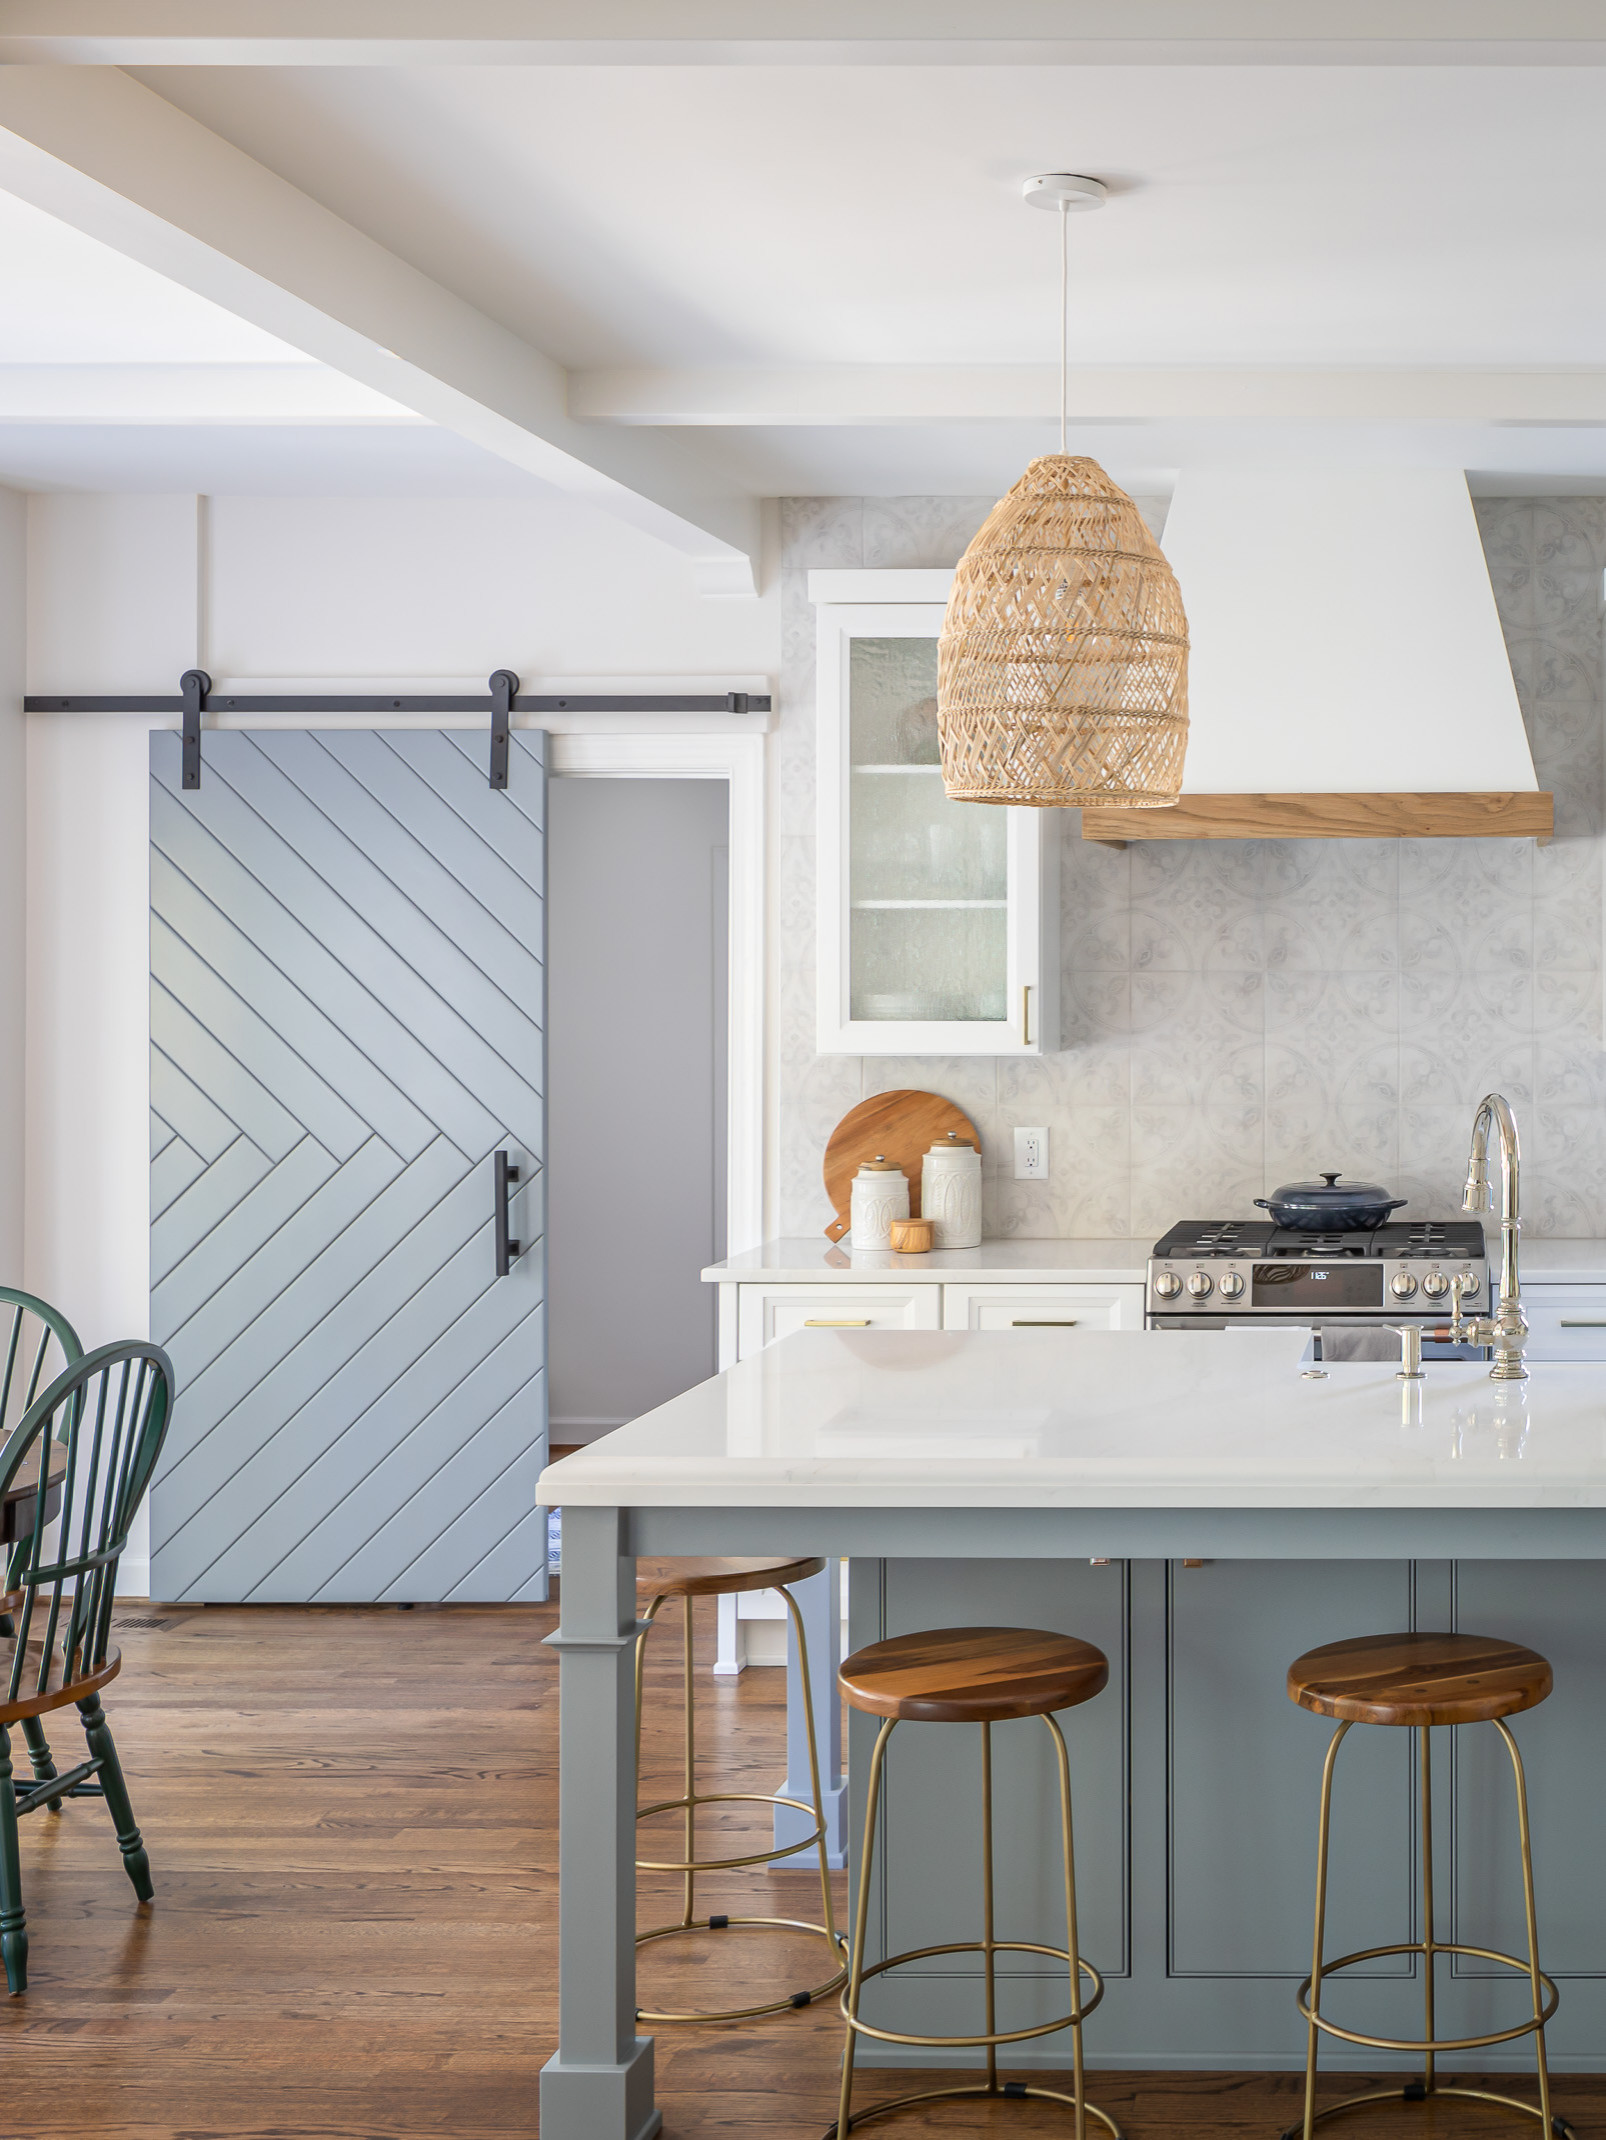 Turquoise Kitchen Remodel Part 2: Color - Hello Creative Family